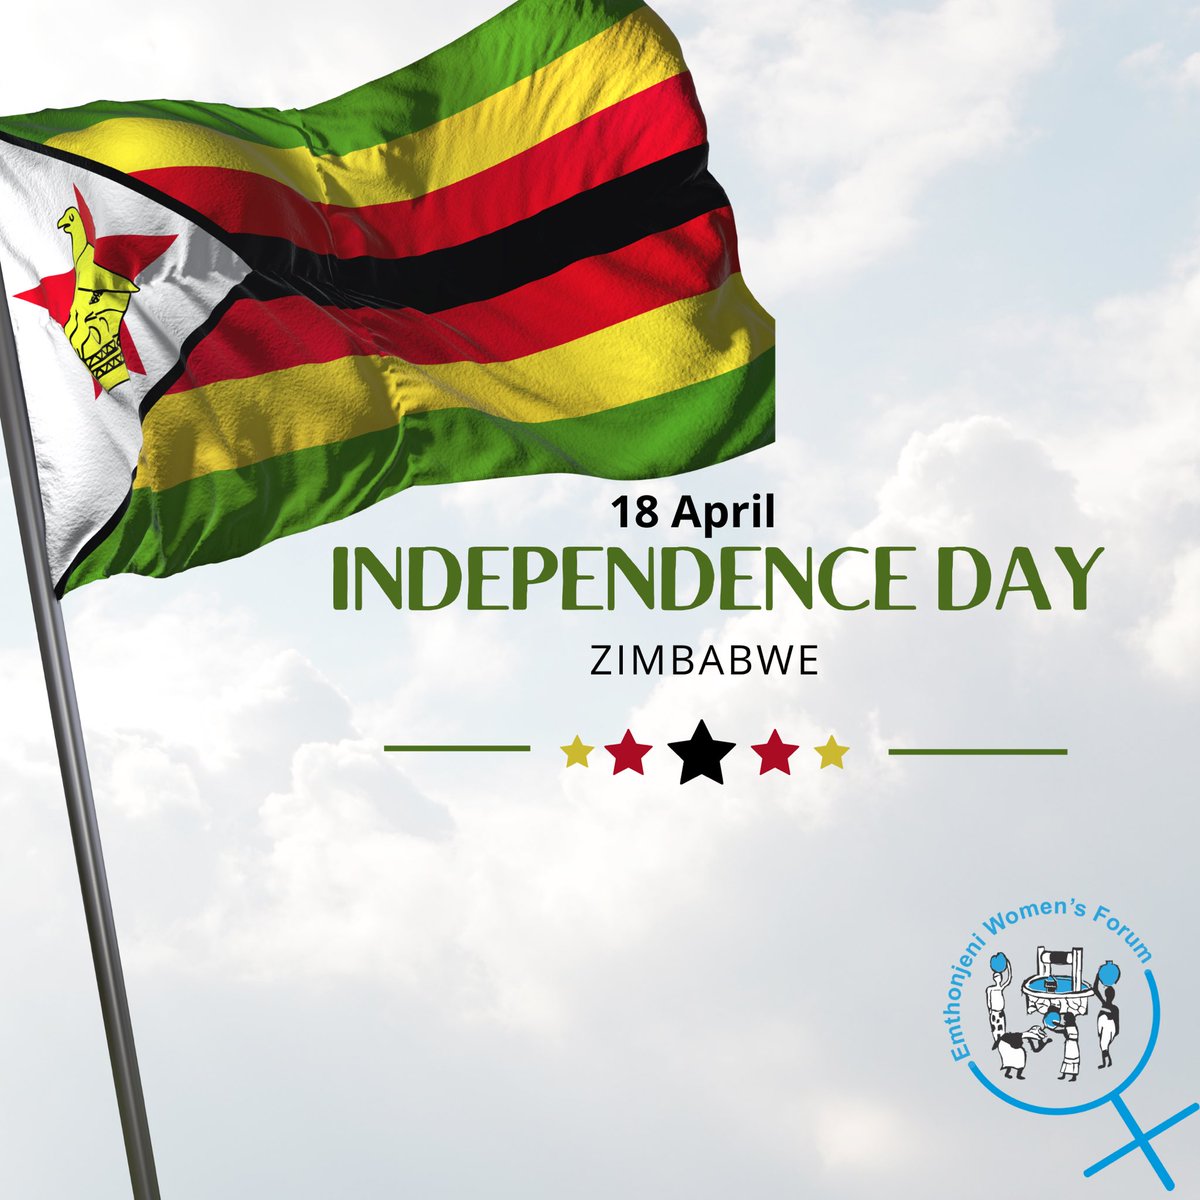 Happy Independence Day, Zimbabwe! As we celebrate, let's renew our dedication to eradicating gender-based violence and empowering women. Strong communities are built on equality and respect. #EndGBV #WomenEmpowerment #IndependenceDay